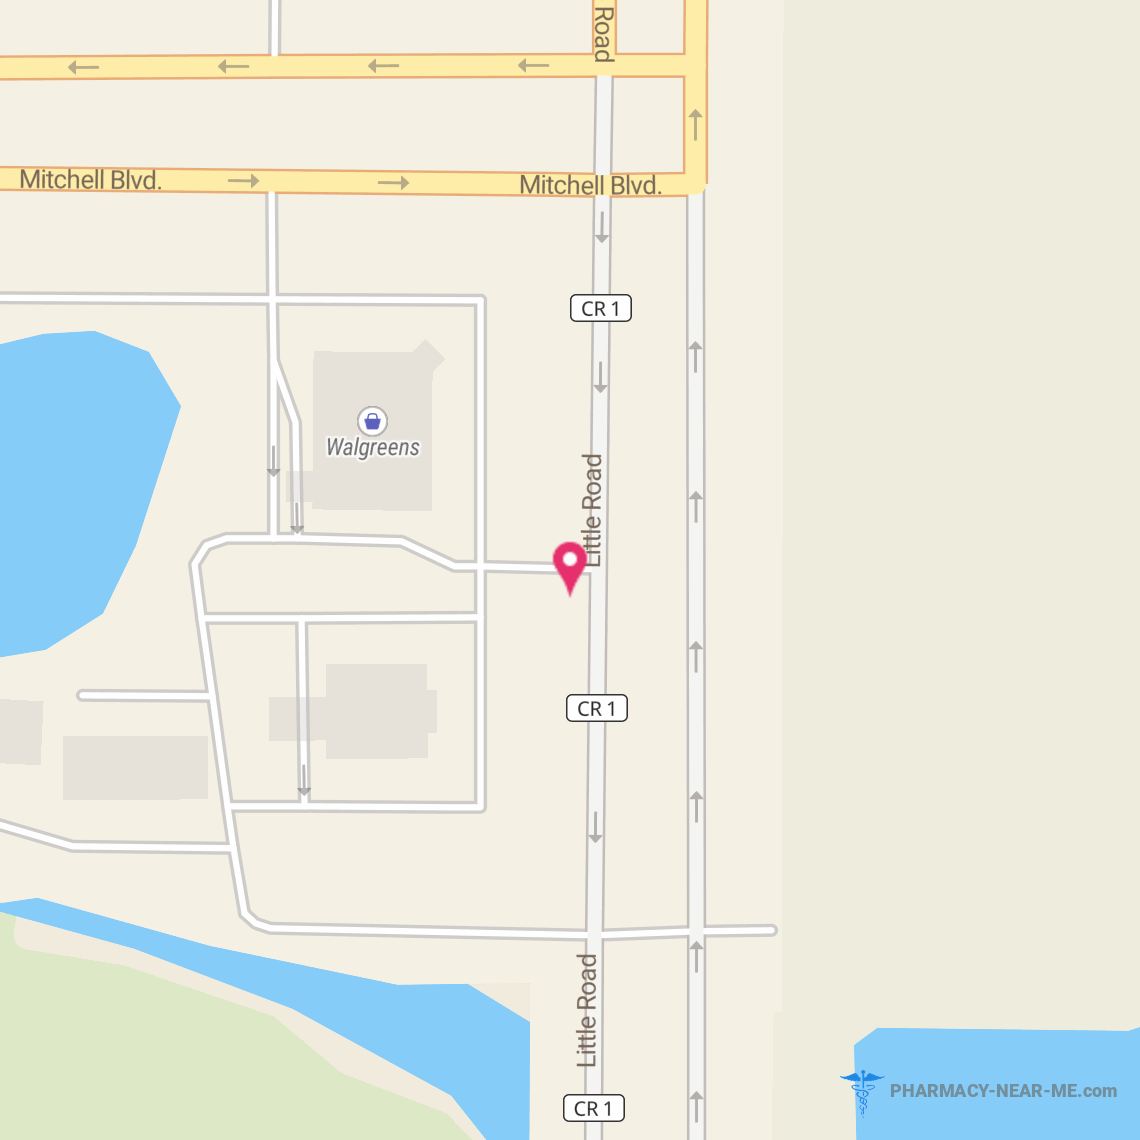 PUBLIX PHARMACY #0643 - Pharmacy Hours, Phone, Reviews & Information: 5324 Little Road, New Port Richey, Florida 34655, United States